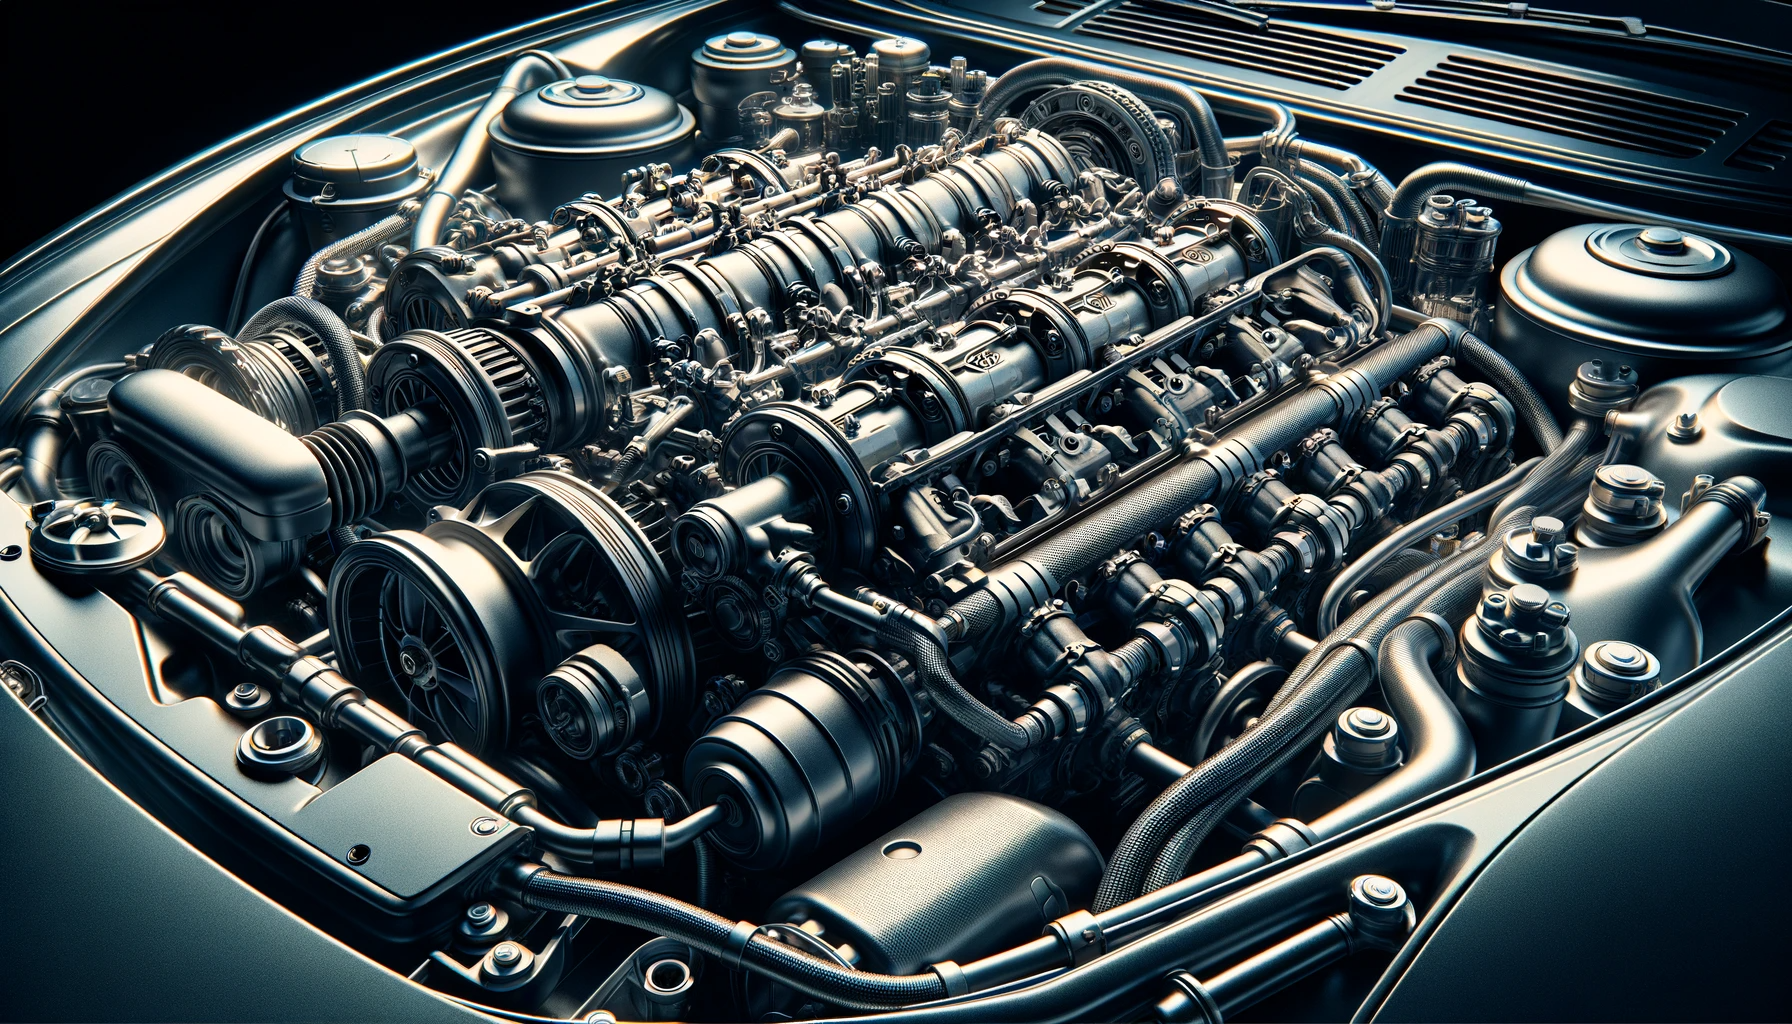 A close up of the 4.0 liter flat six engine